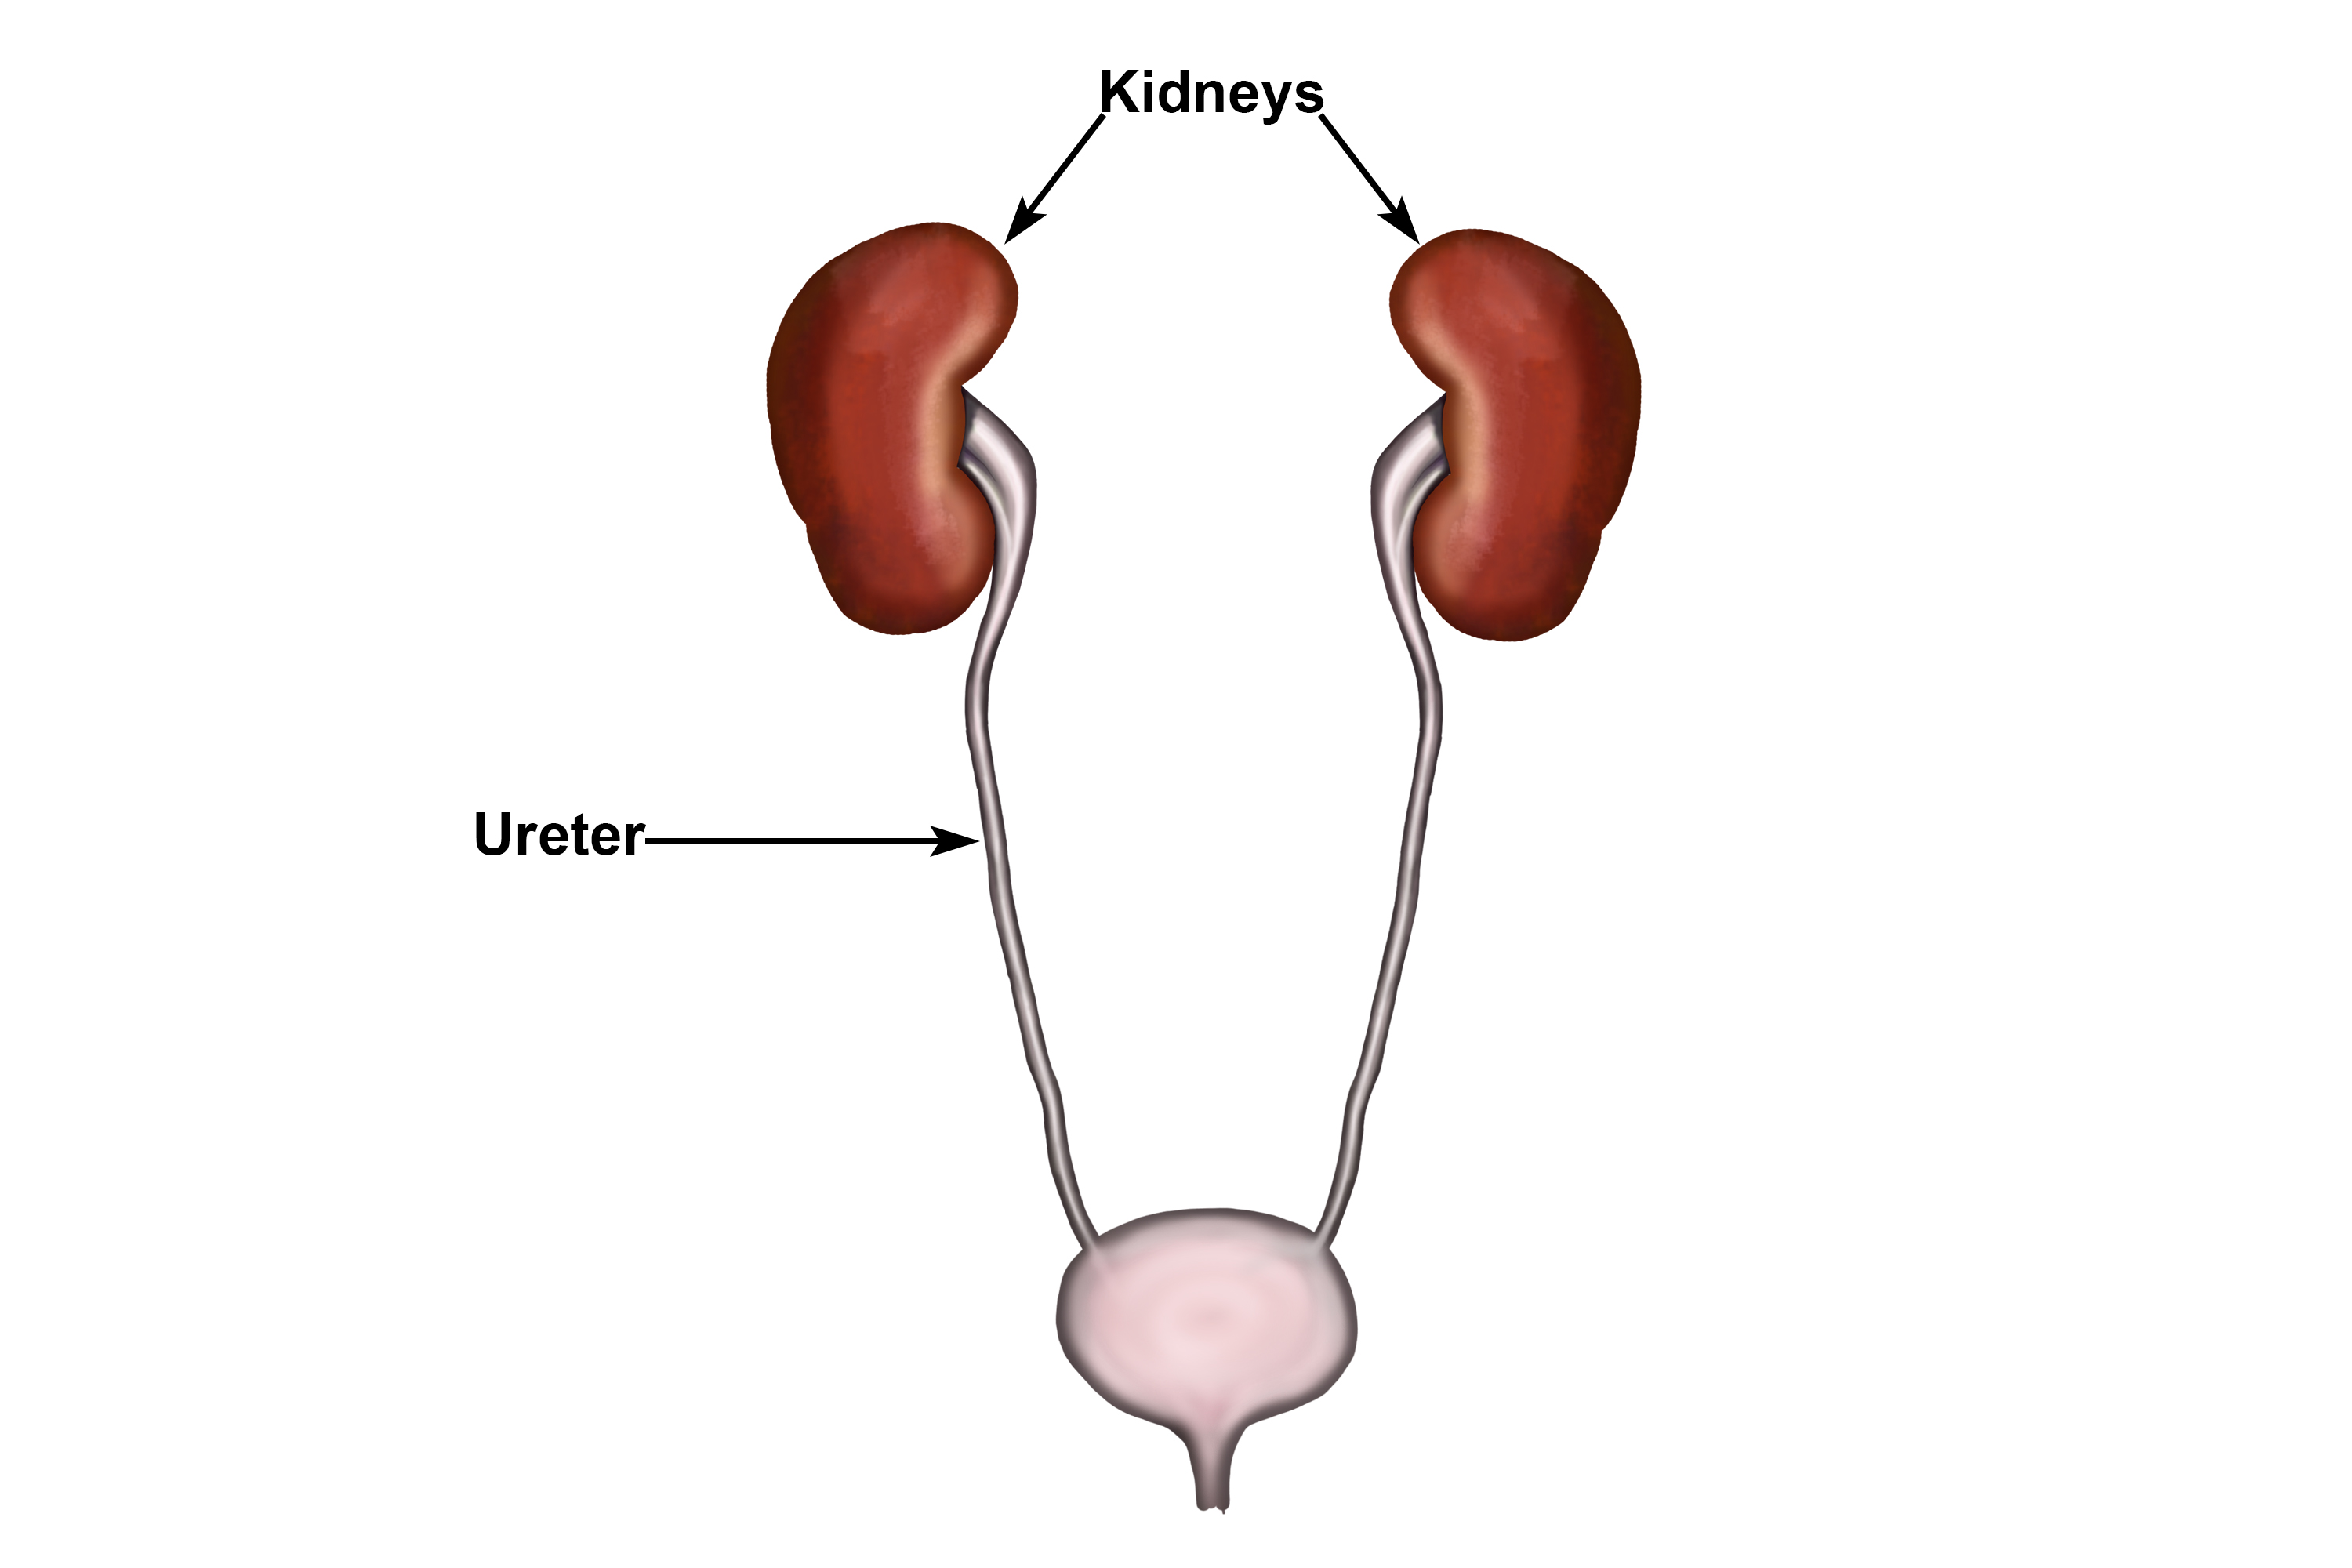 The ureter is a tube that runs from the kidneys to the bladder 